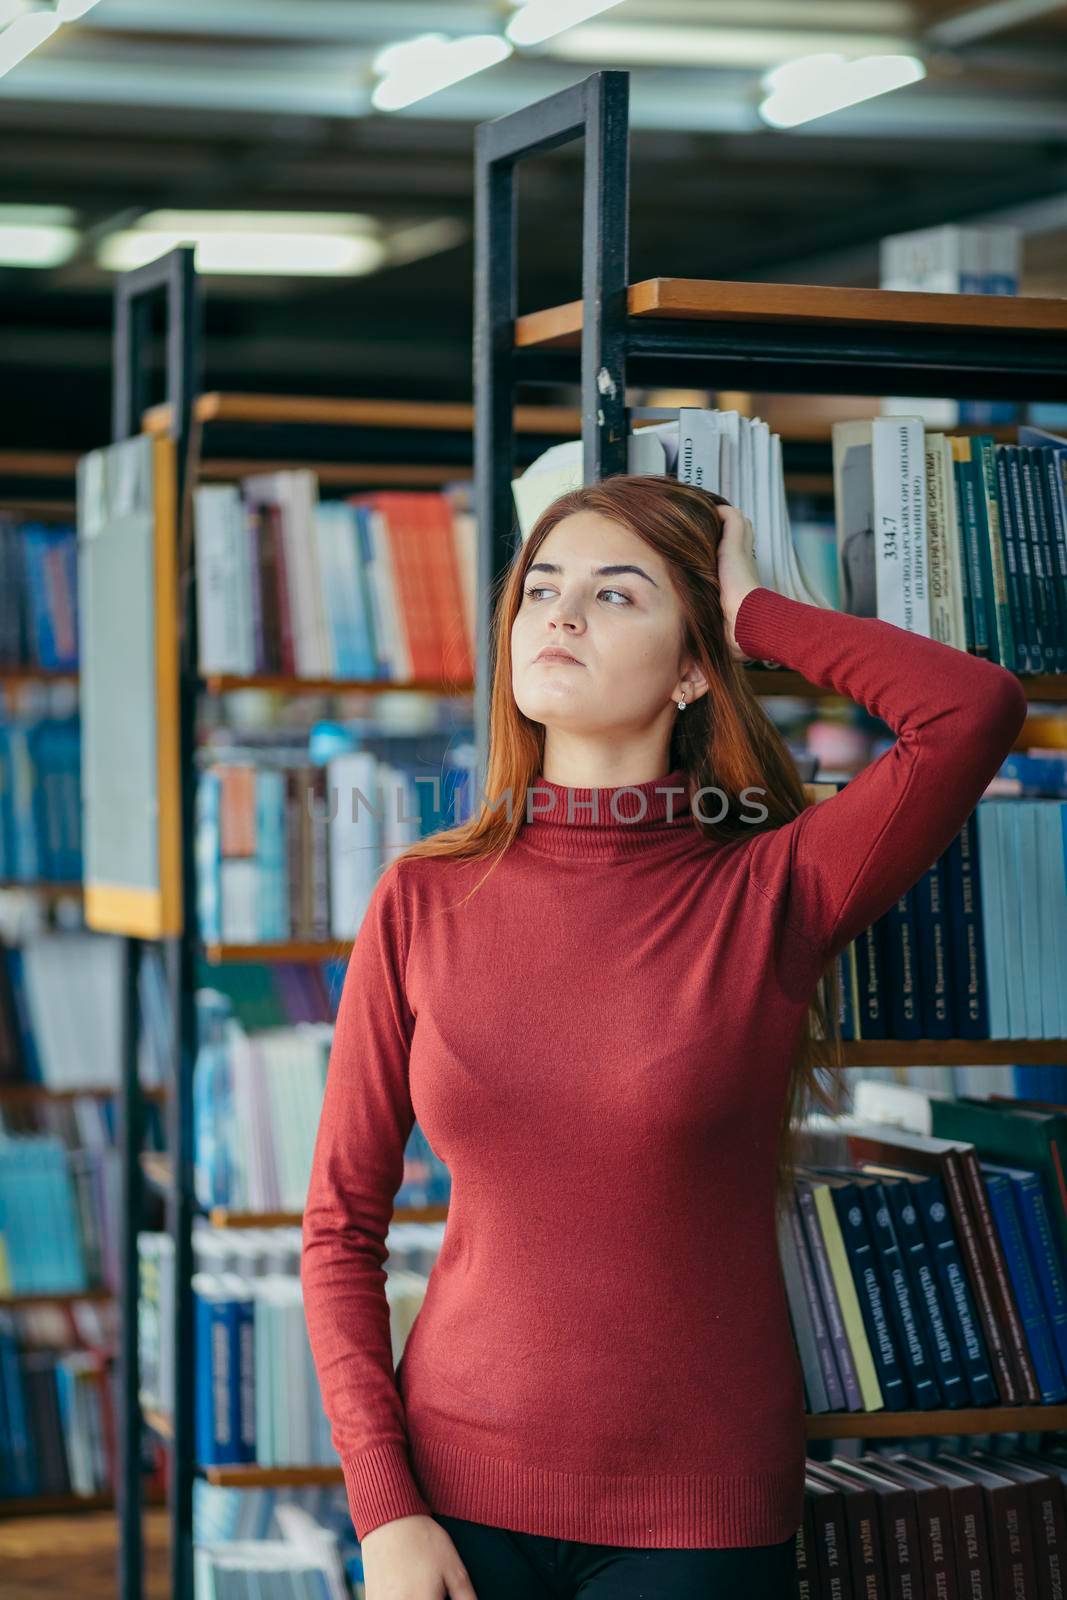 A girl holding a book shelf, student in the library by Dmytro125